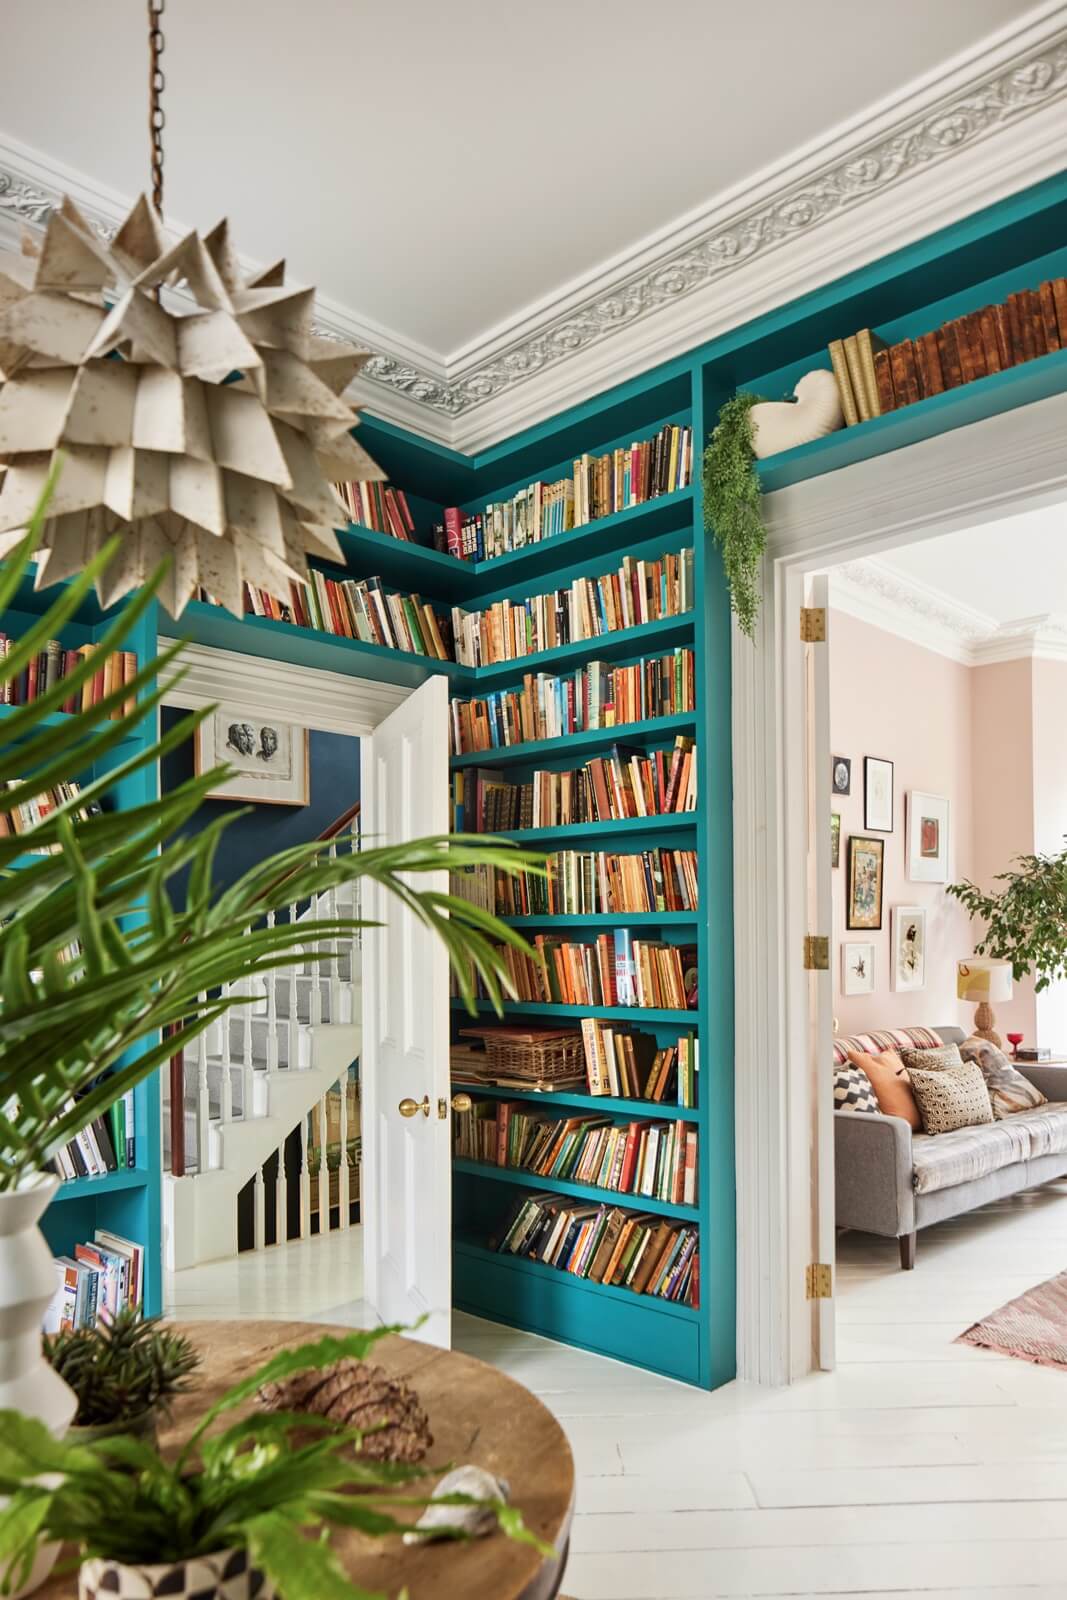 A Light Victorian Townhouse with Teal Reading Room